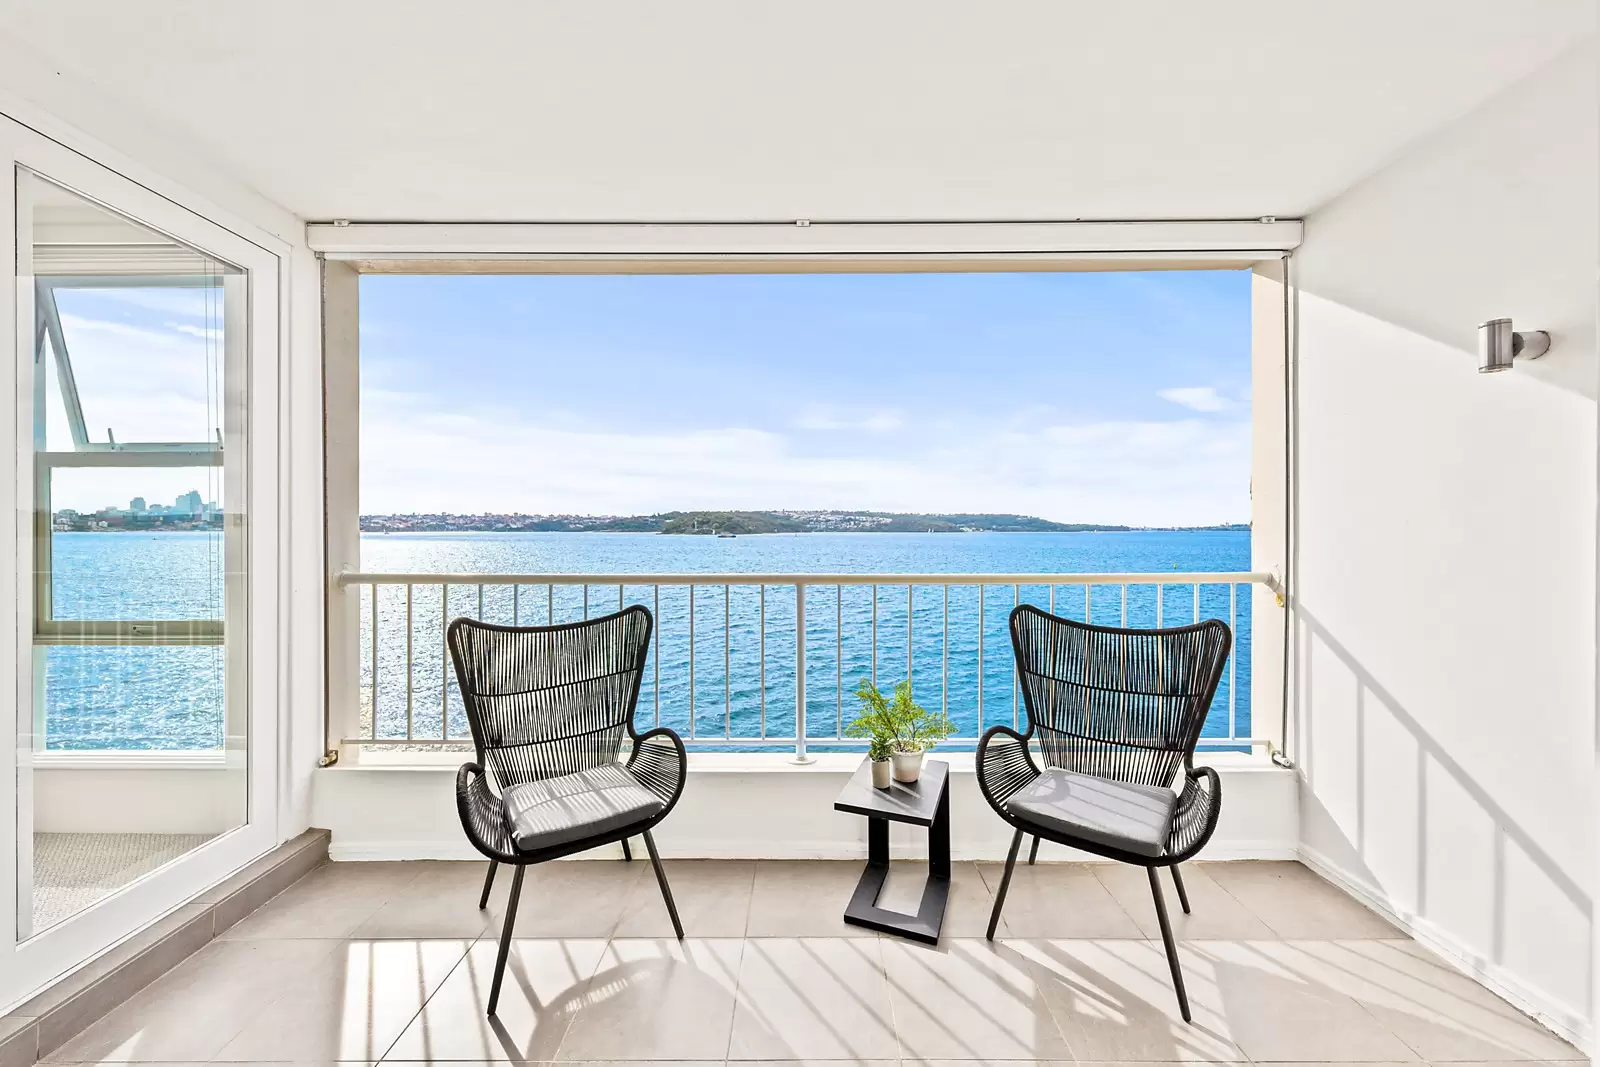 Photo #11: 2/126 Wolseley Road, Point Piper - Sold by Sydney Sotheby's International Realty